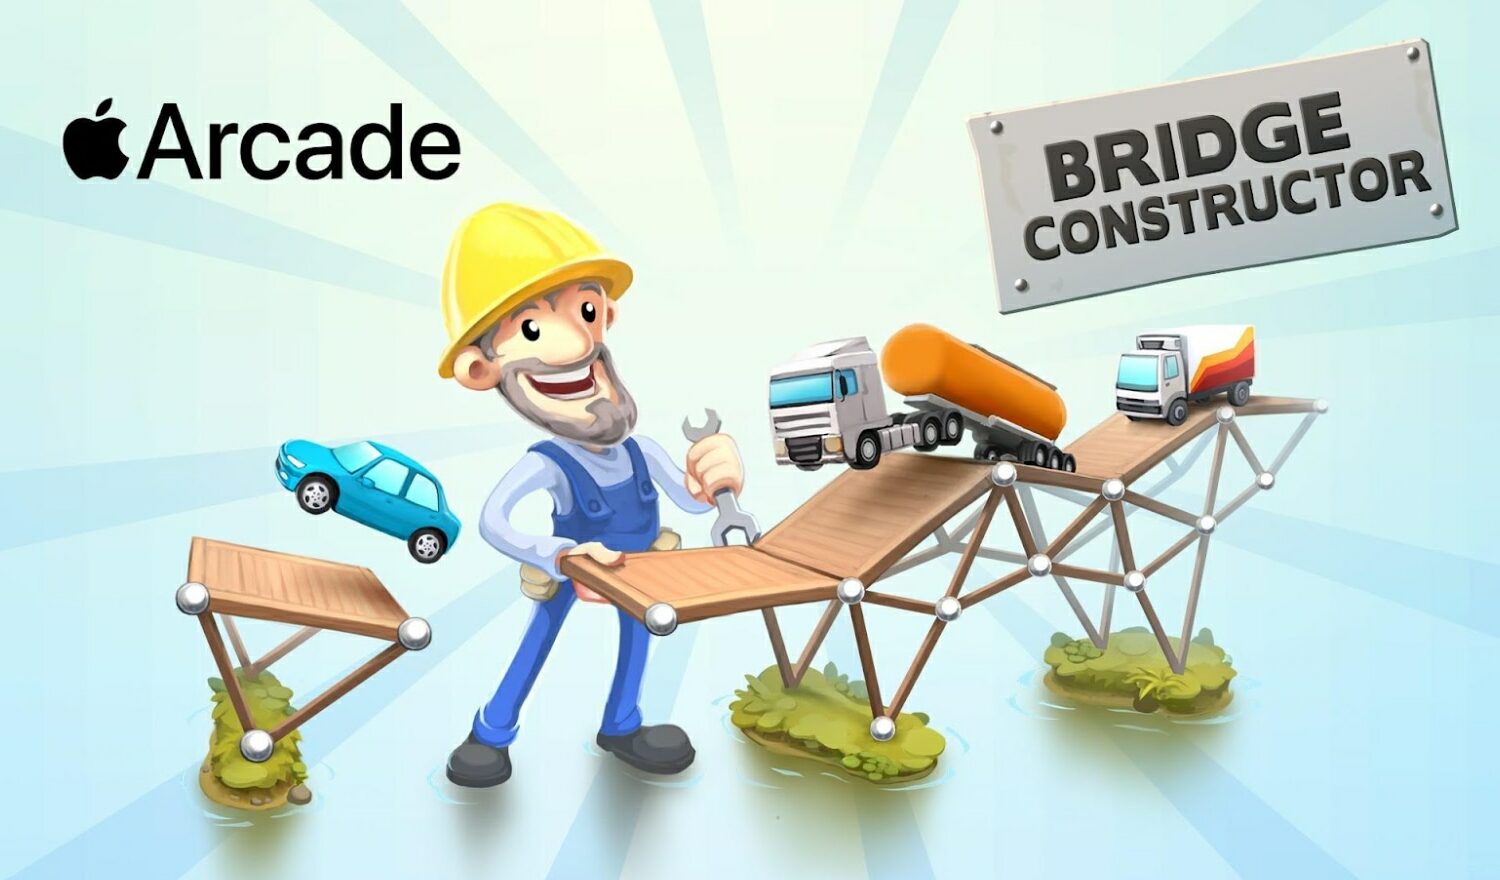 Promotional graphics for the Bridge Constructor game, relaunched on Apple Arcade as Bridge Constructor+